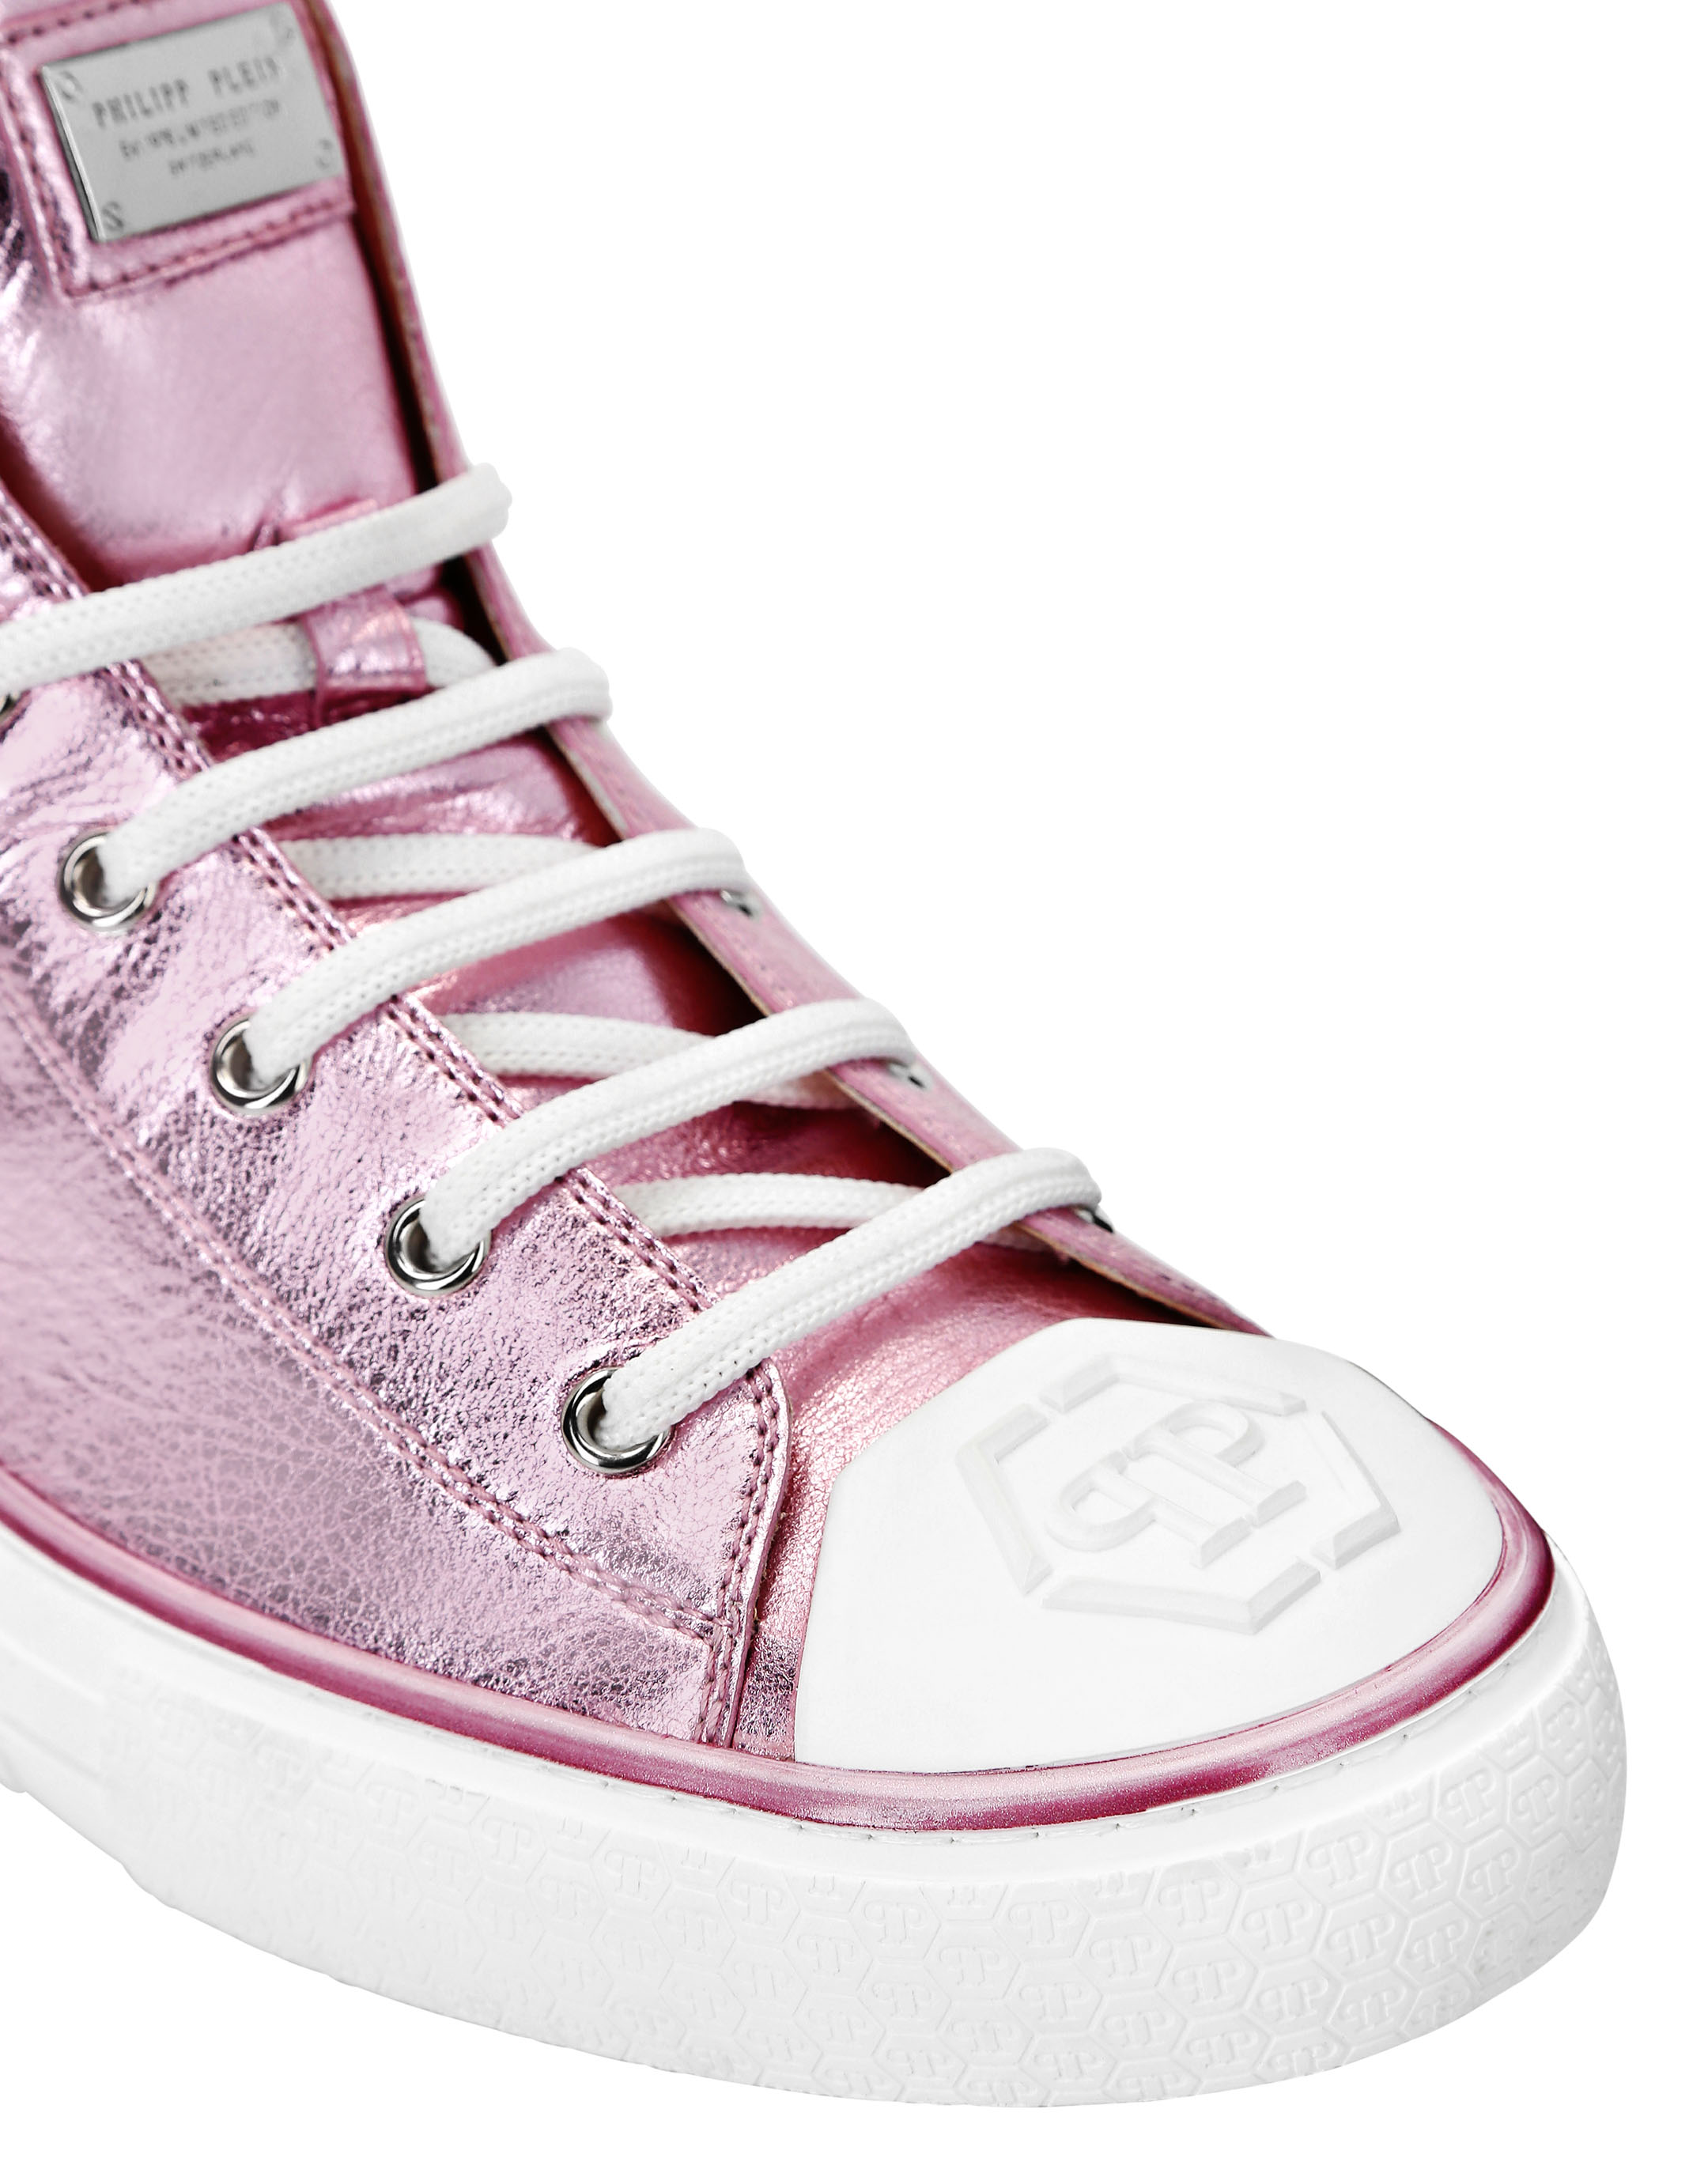 Saint Laurent Sneakers Women Leather White Pink